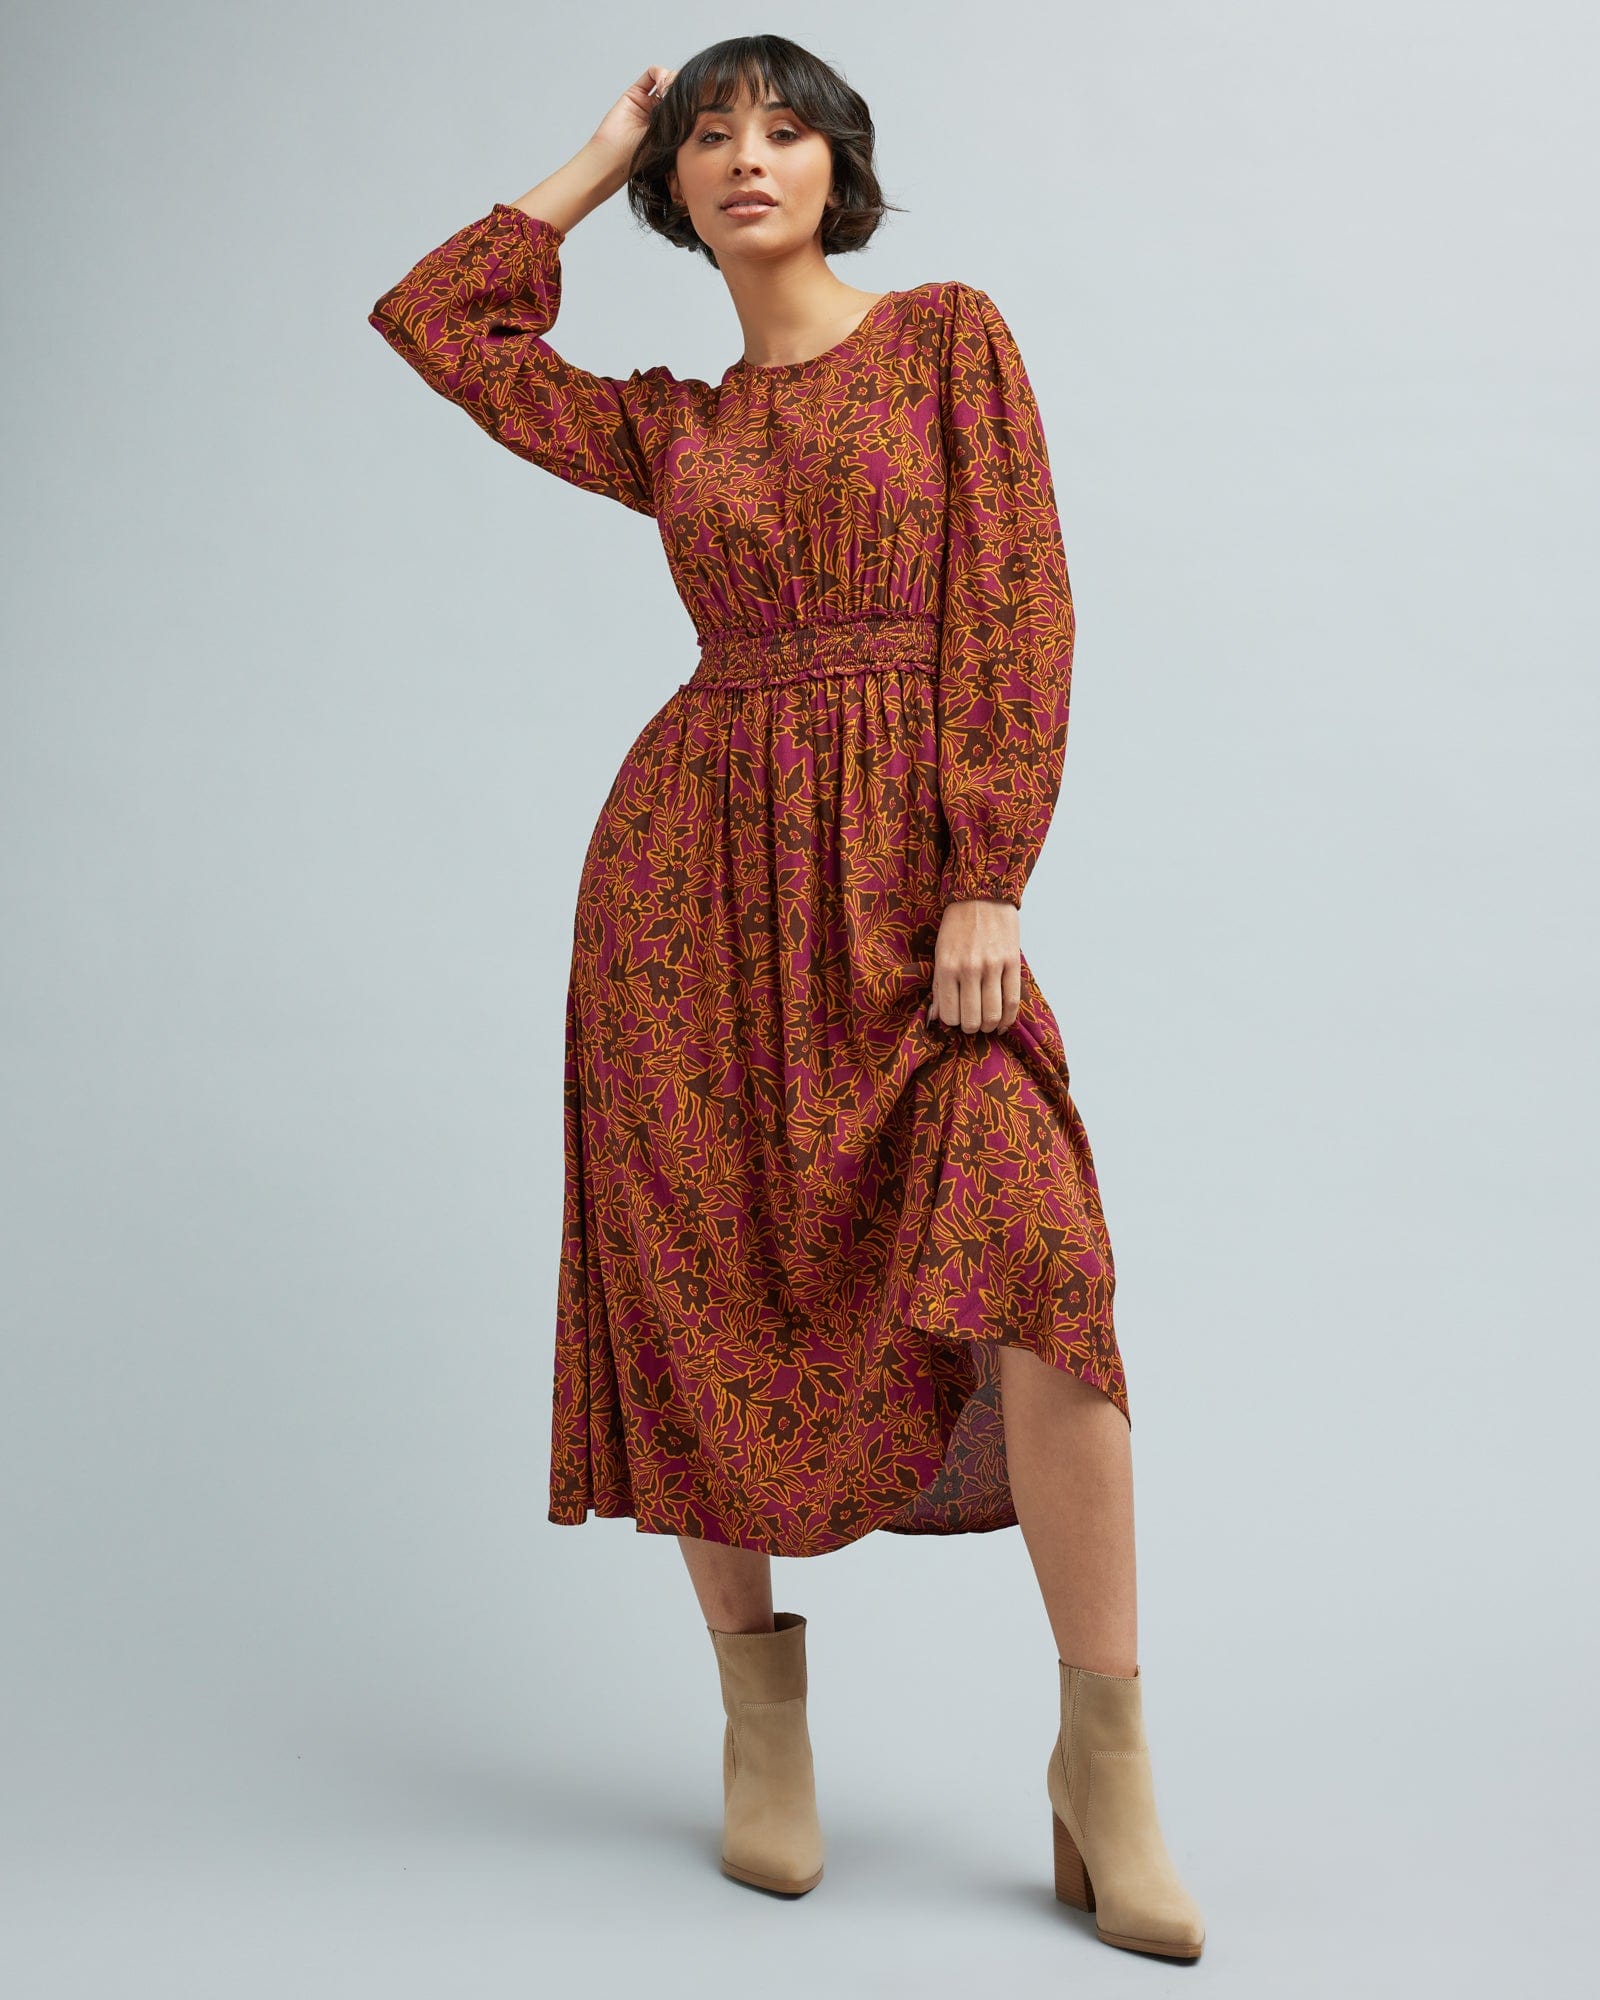 Woman in a long sleeve, brown and orange floral print dress